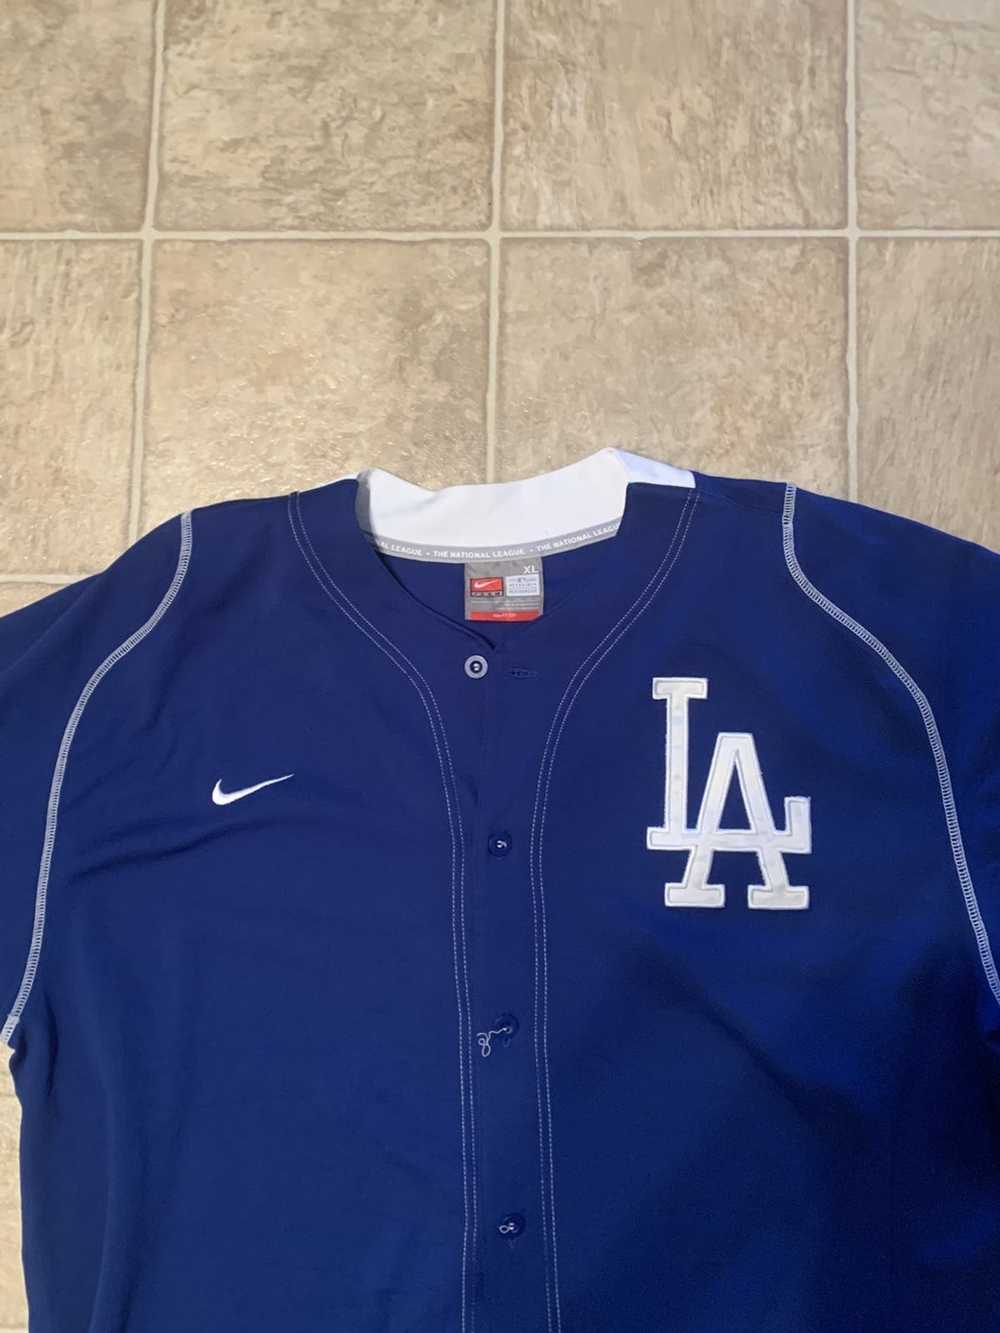 Tommy Bahama Los Angeles Dodgers 2010 Embroidered Shirt XLX